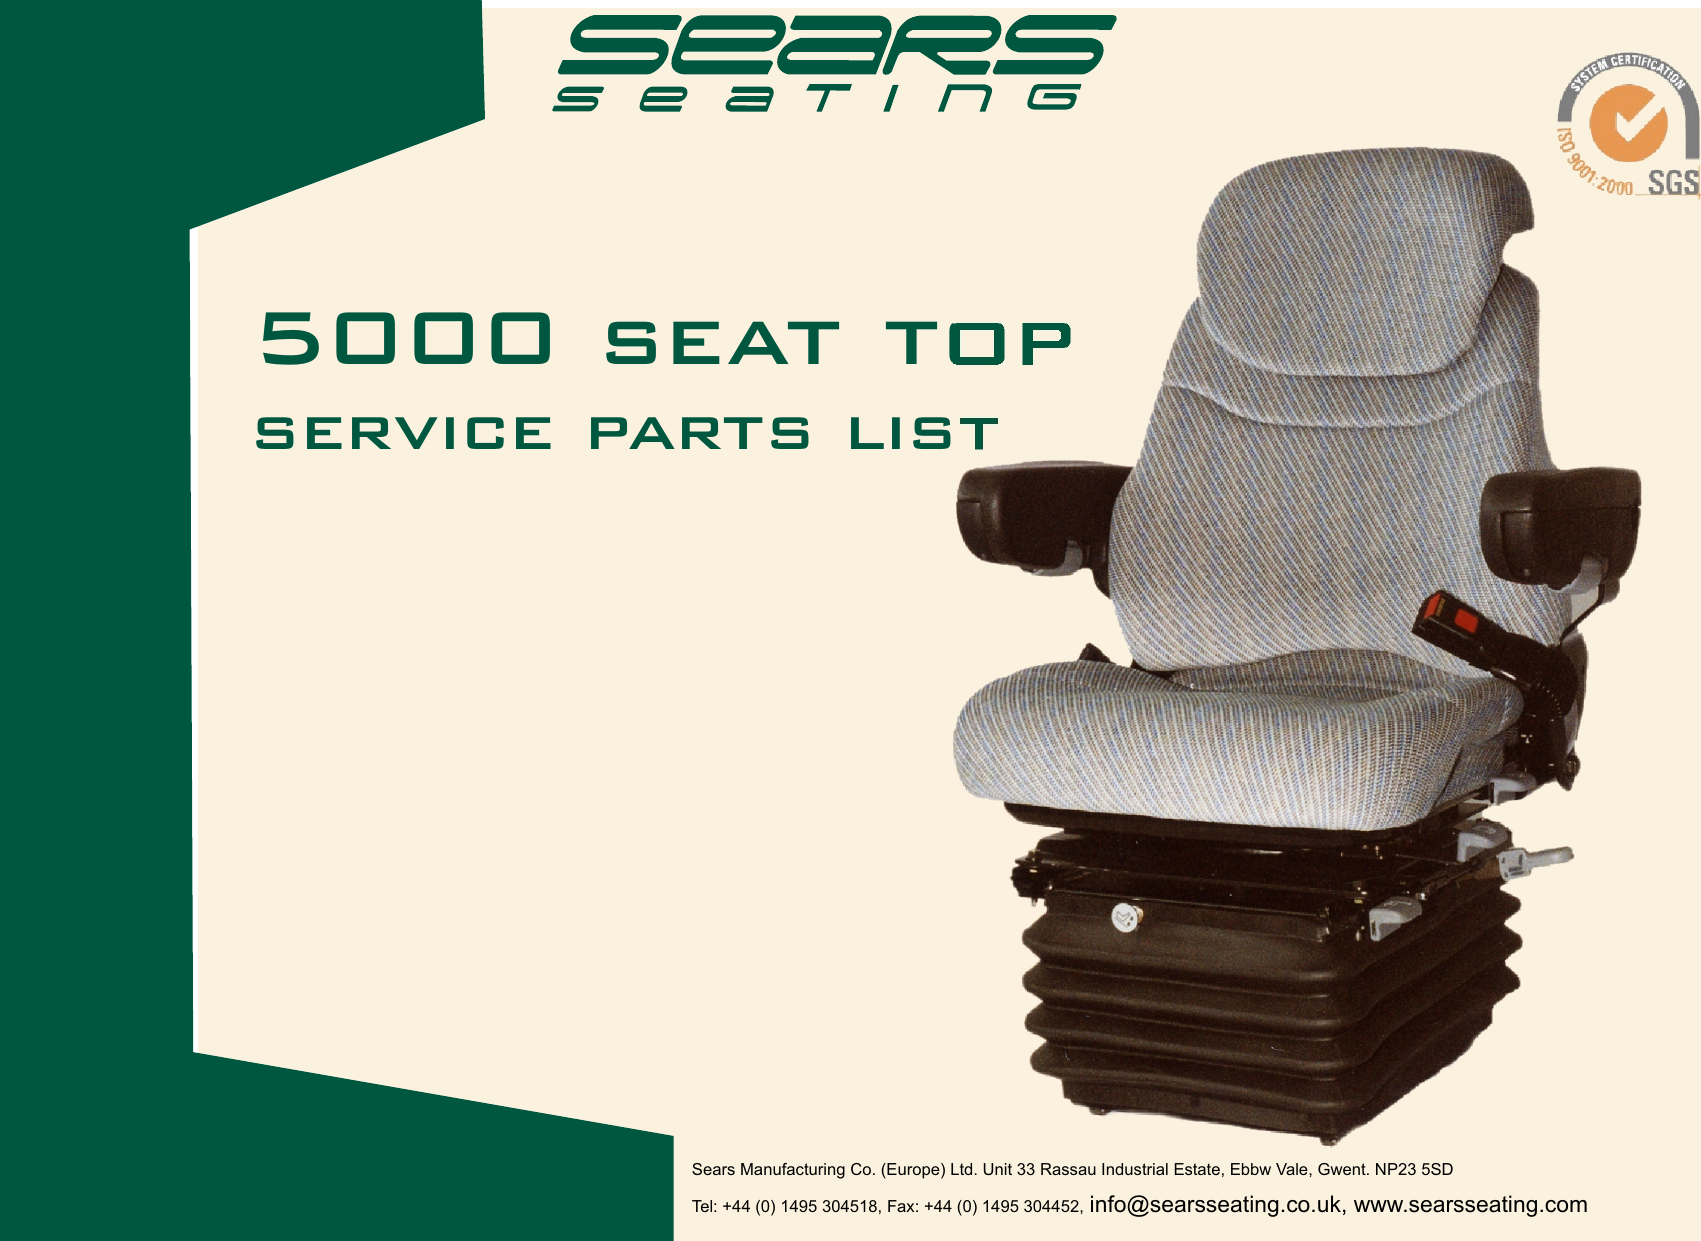 Page 1 of 10 - Sears Sears-Seat-Top-5000-Users-Manual- PARTS & FITTING INSTRUCTIONS LIST 01-05 No Prices  Sears-seat-top-5000-users-manual